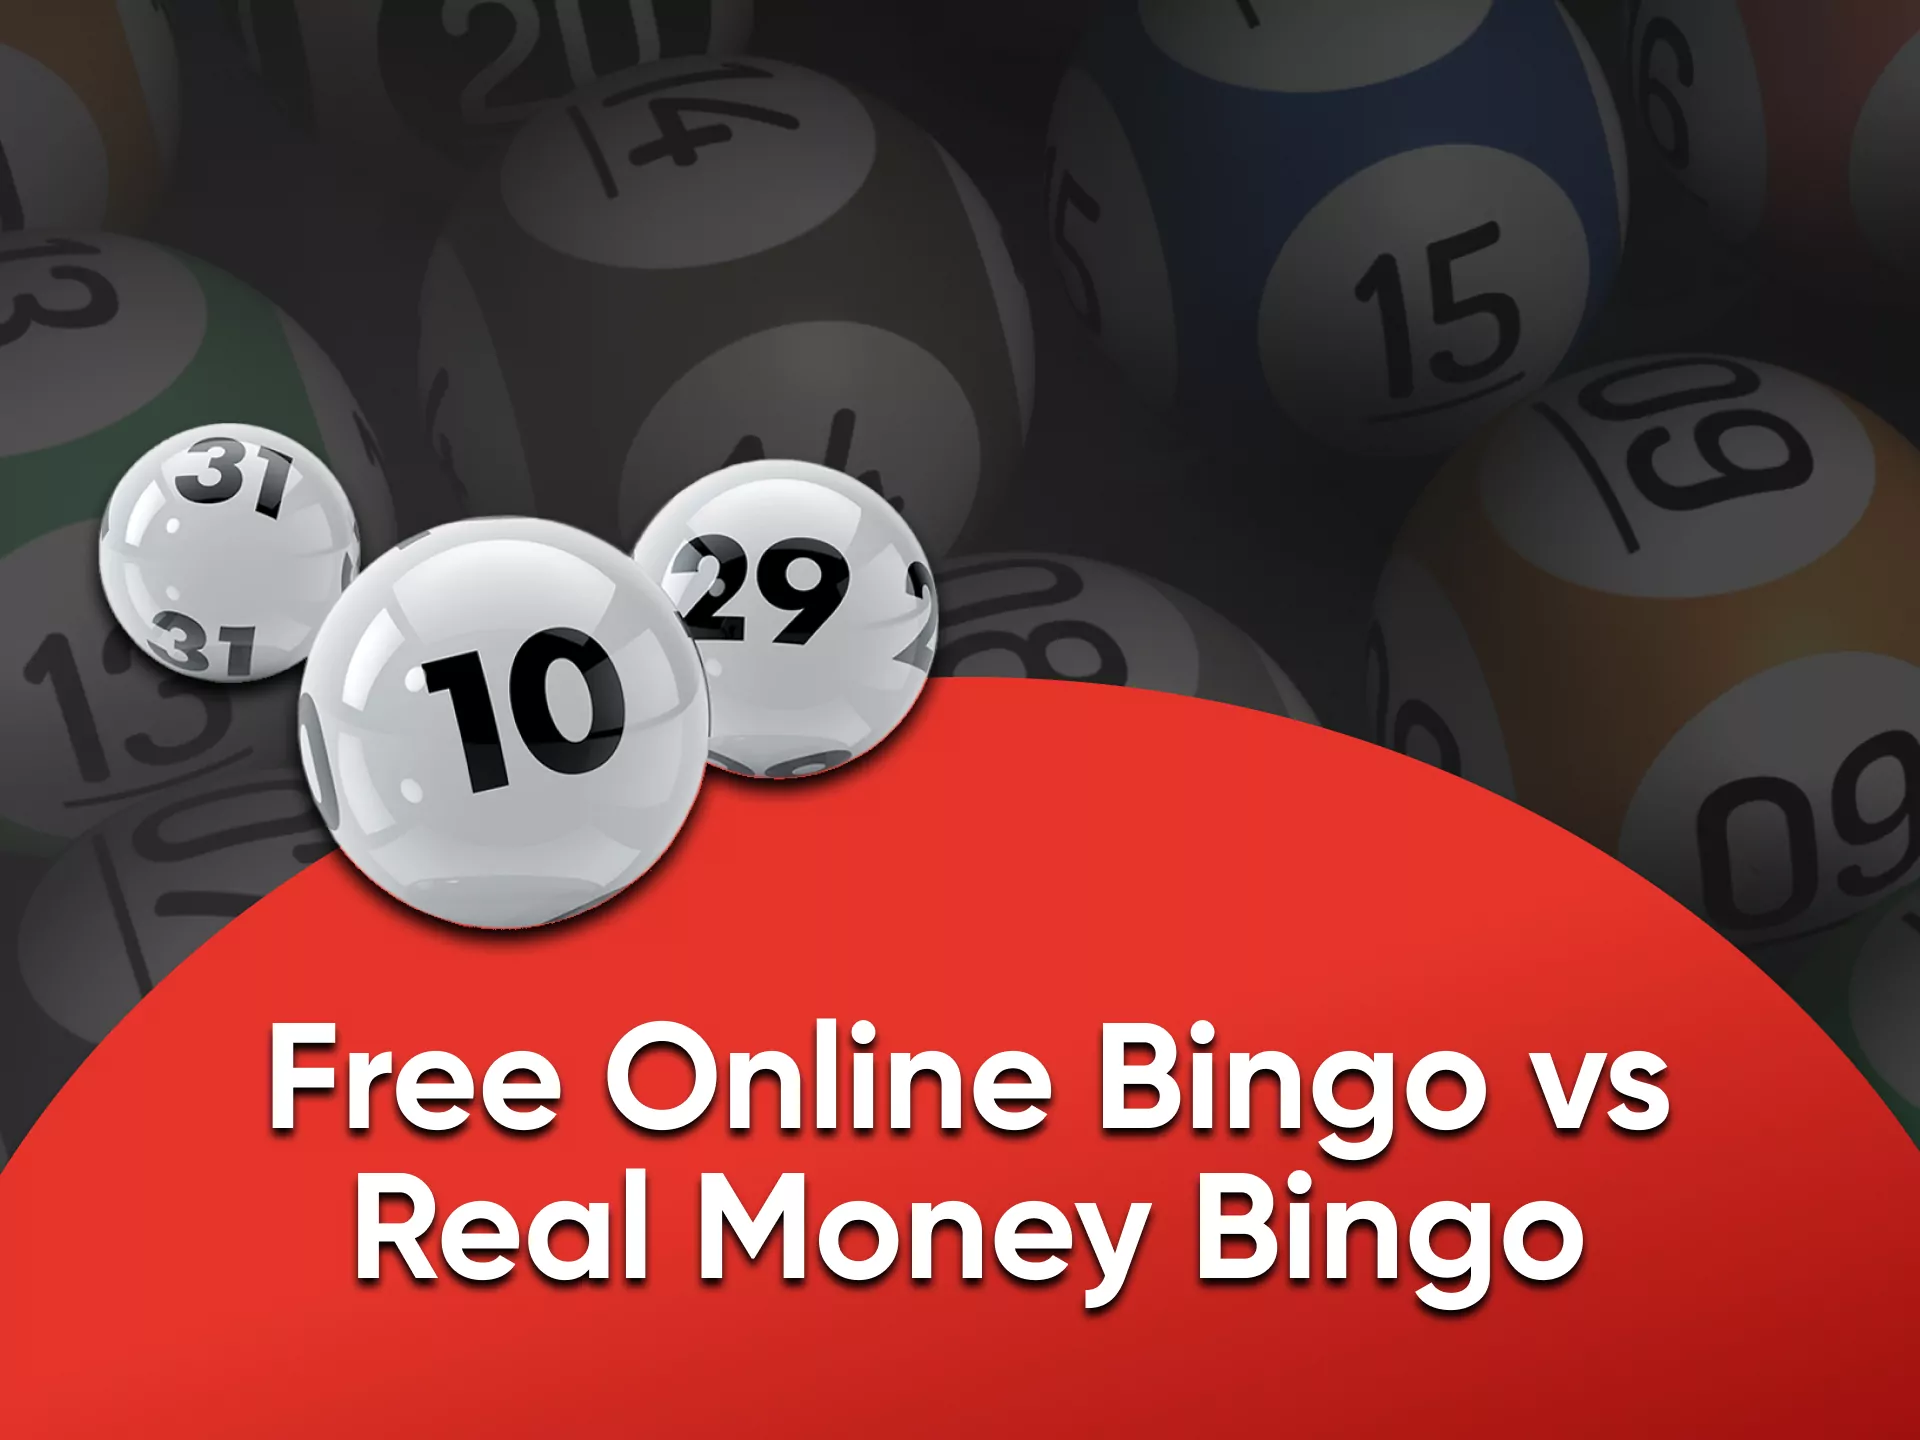 Play Bingo for both real money and no real money wagers.